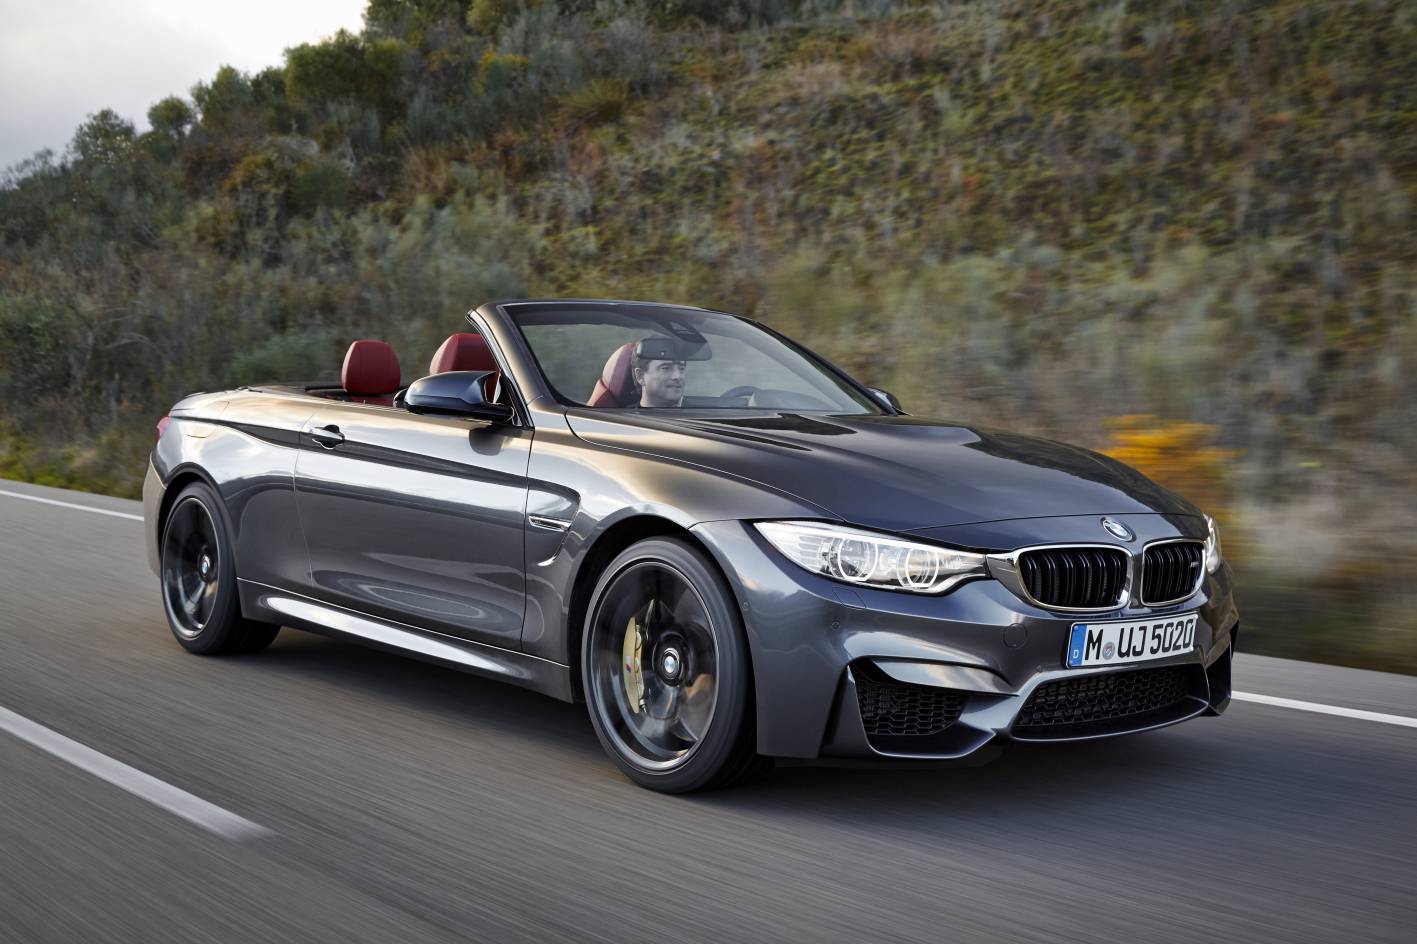 New BMW M4 Convertible revealed